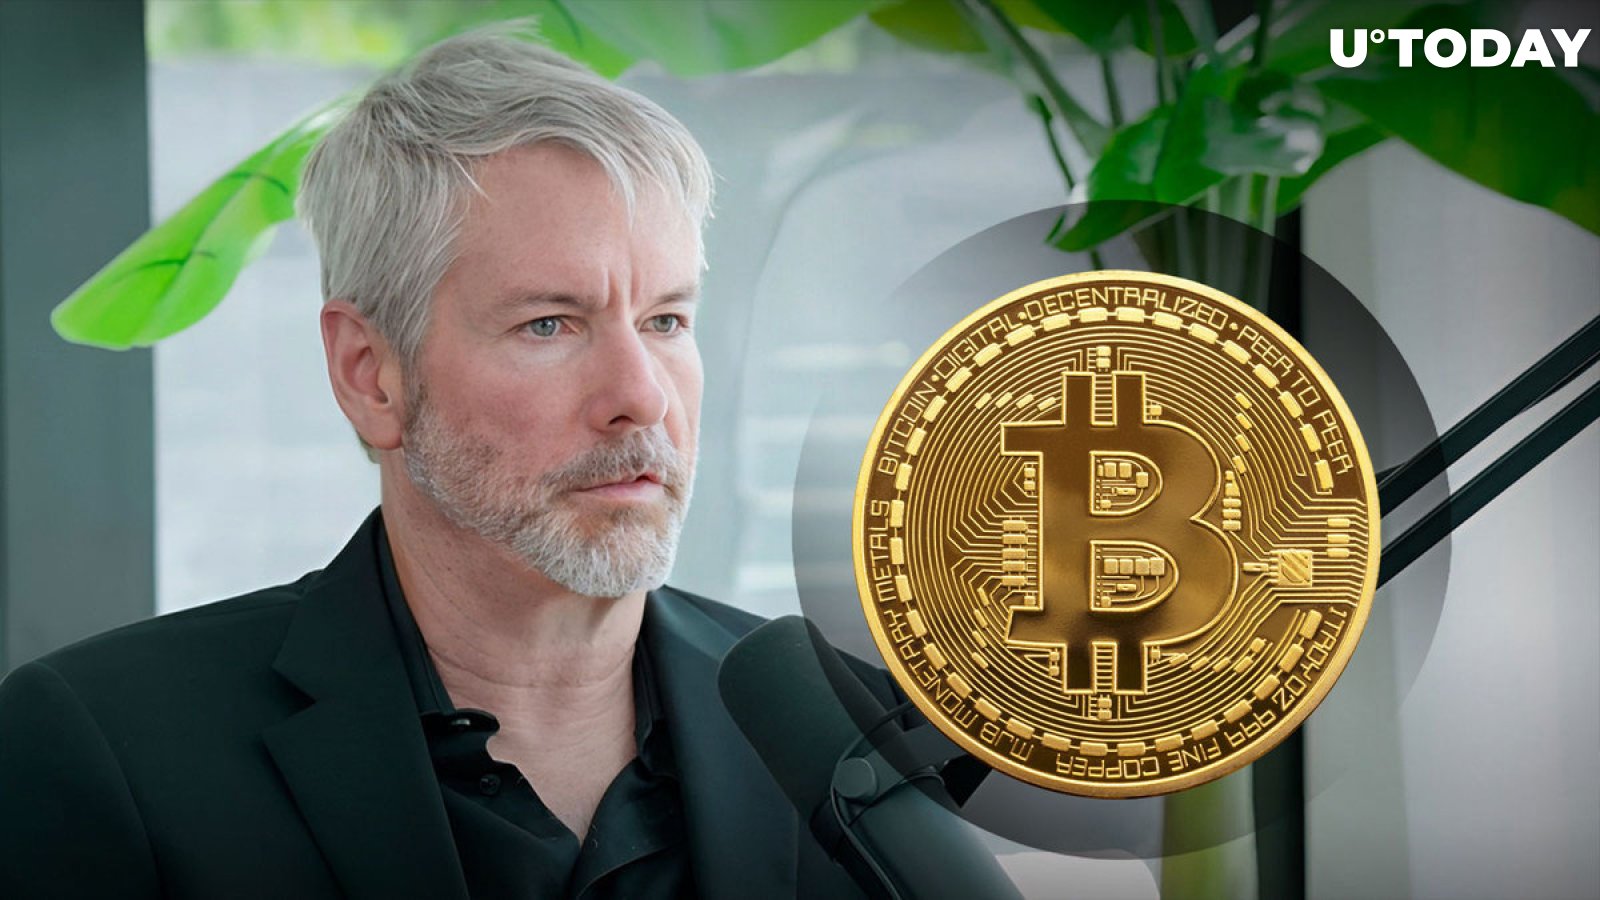 Michael Saylor Makes Big Statement on Bitcoin as Market Uncertainty Looms